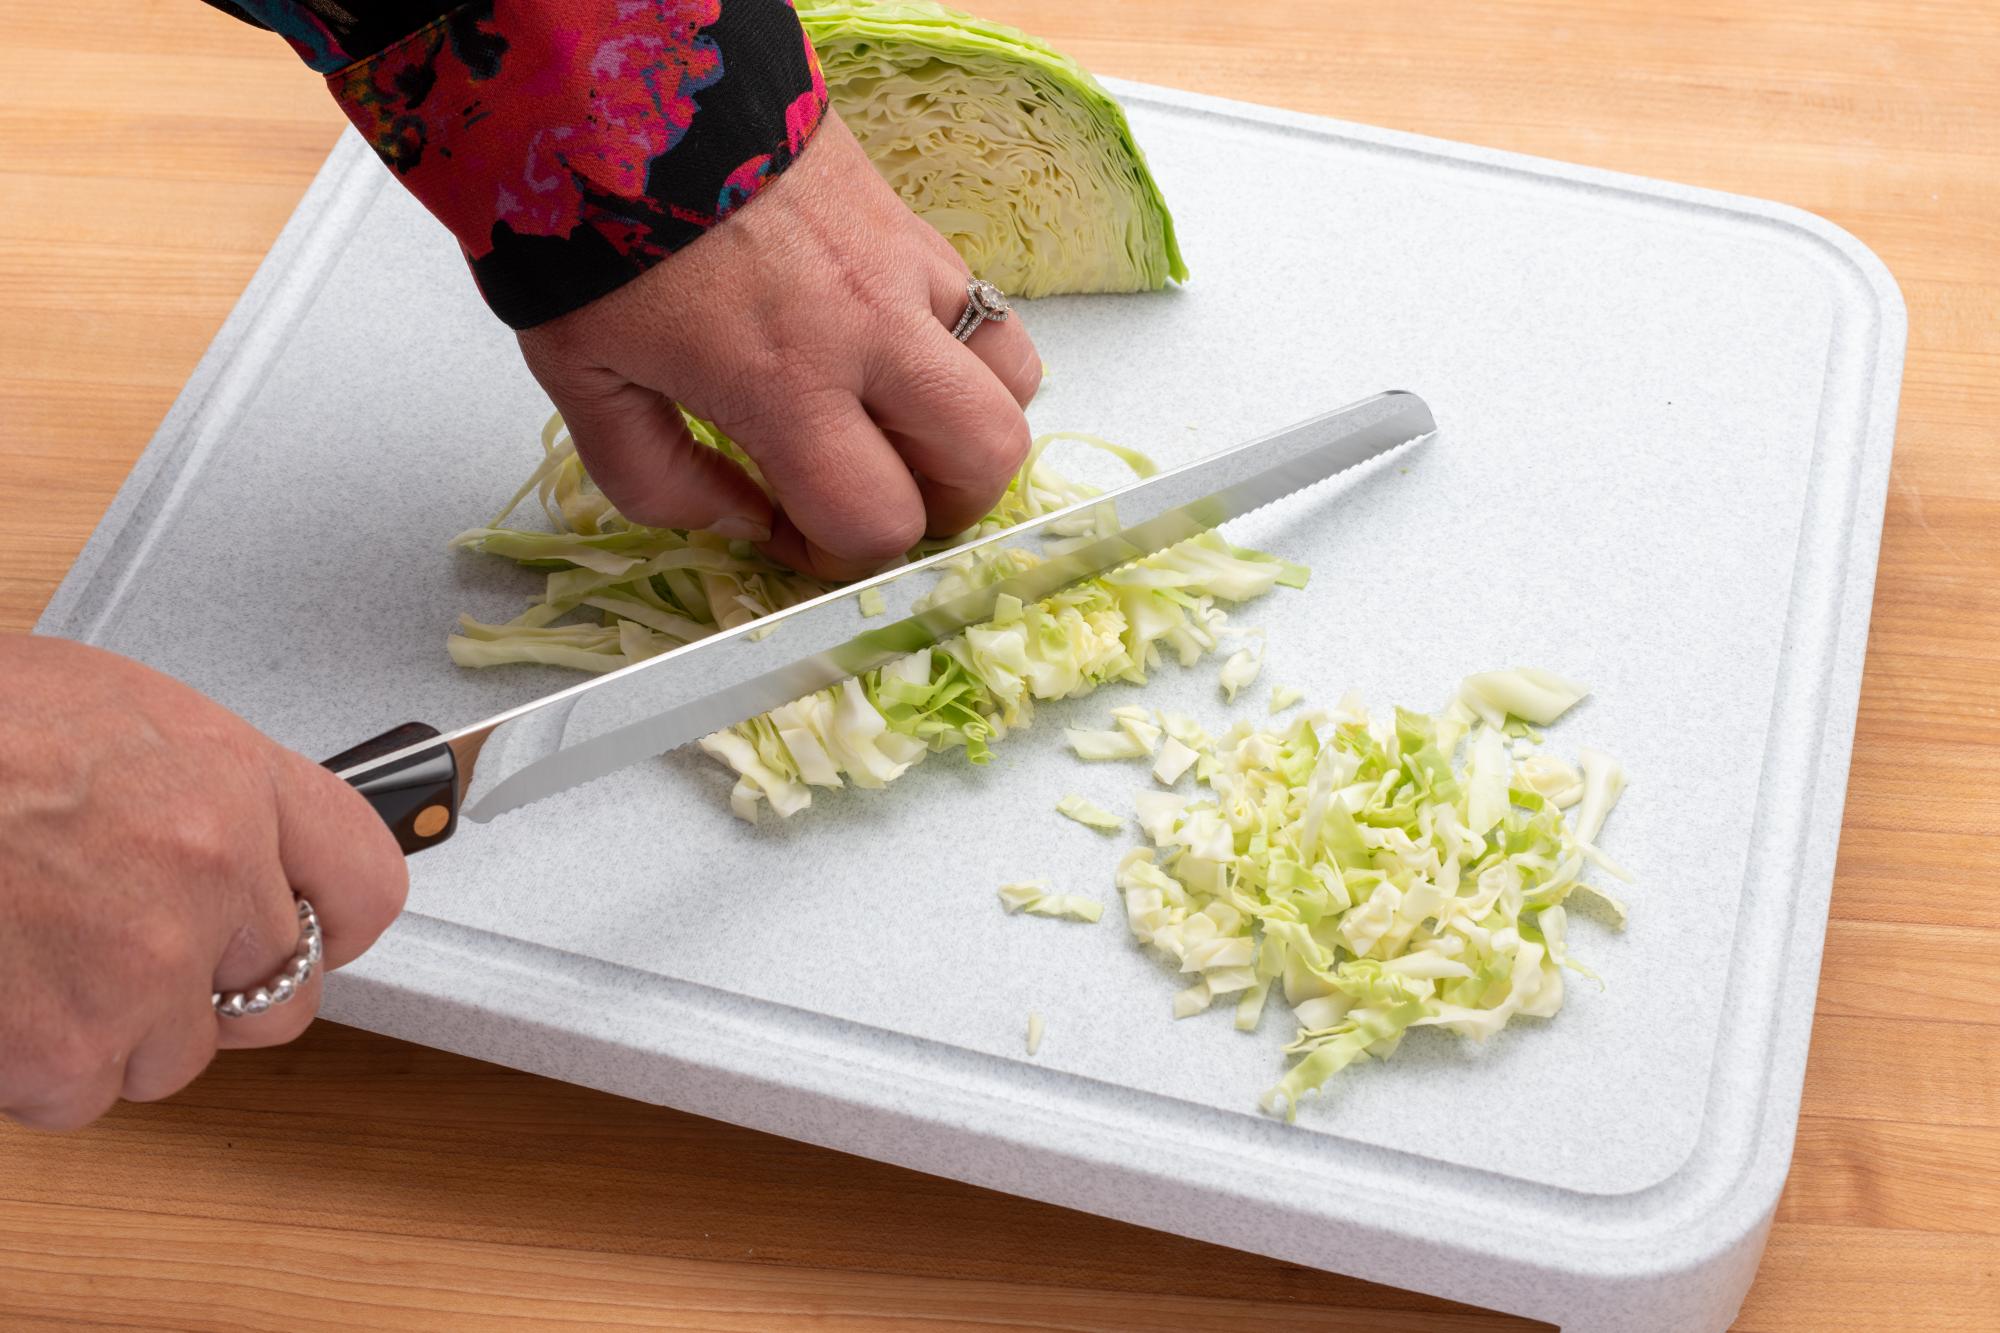 The Santoku Style Slicer is great for shredding cabbage.